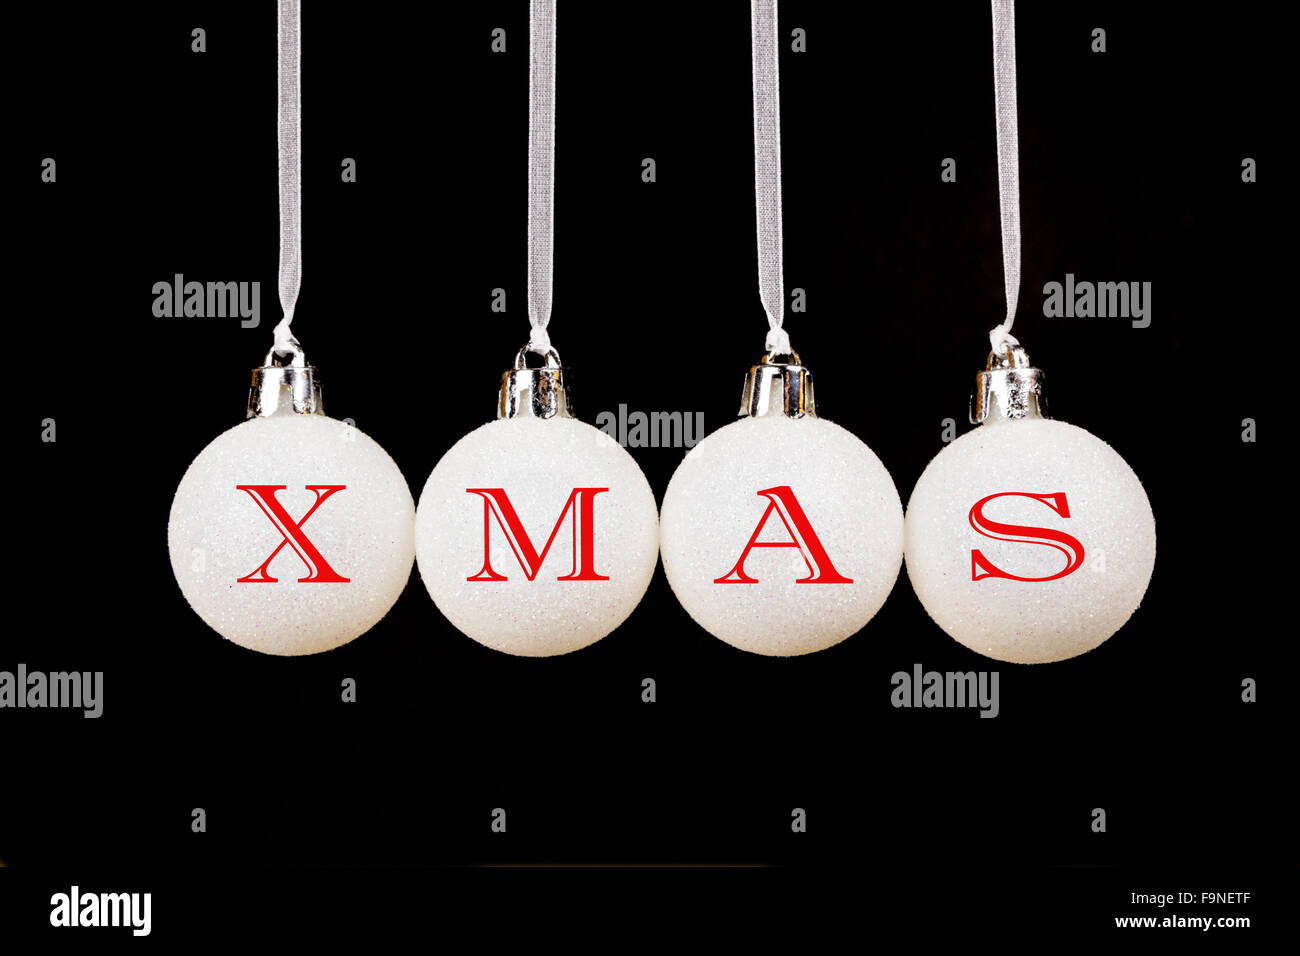 Word XMAS on white christmas balls hanging in a horizontal row isolated on black background Stock Photo